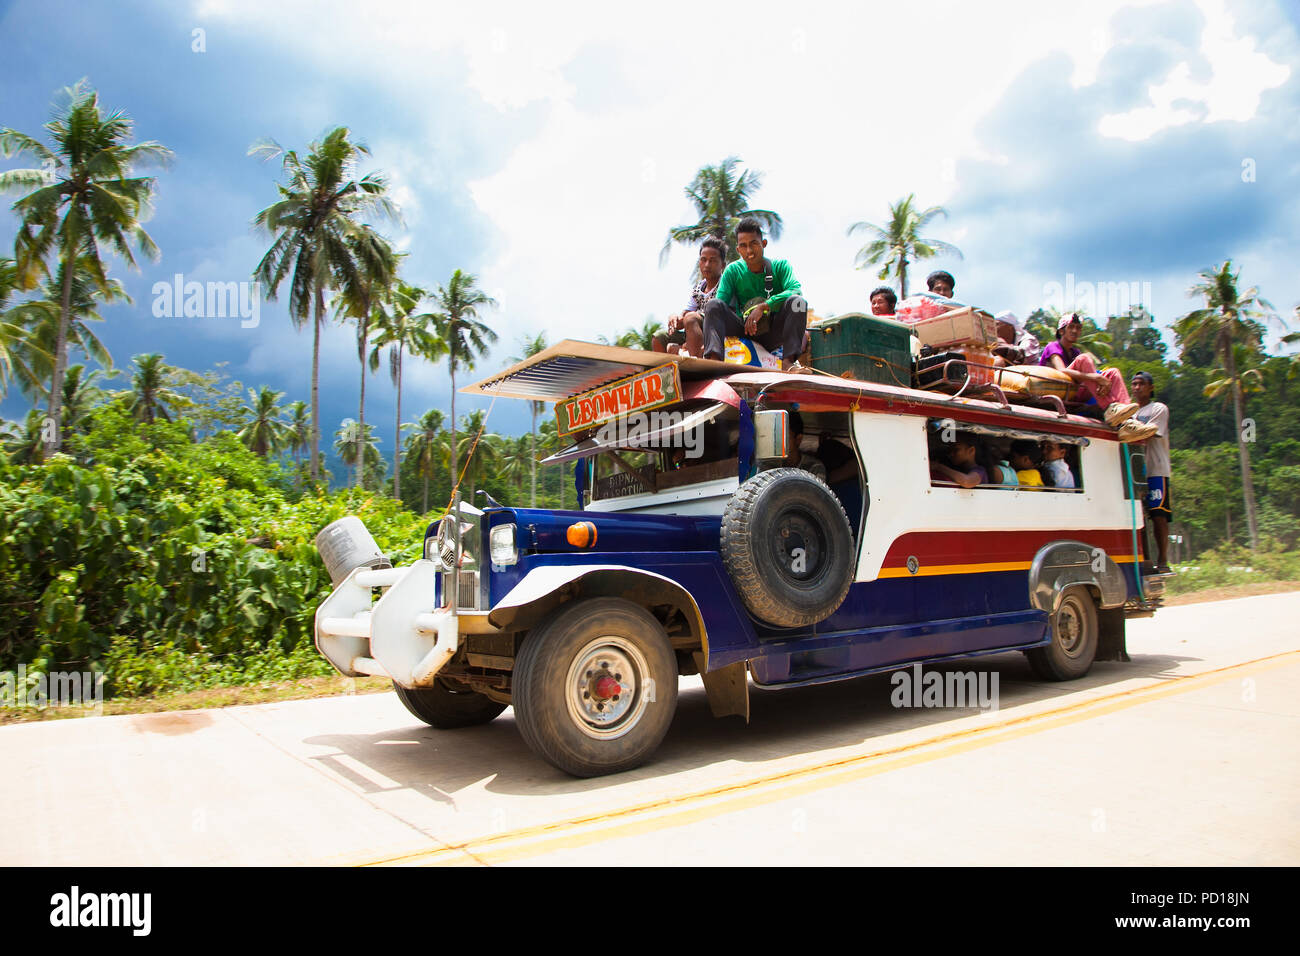 PALAWAN, PHILIPPINES- MARCH 28, 2106: Local people travel with public traditional transportation at Palawan island on March 28, 2016, Philippines. Stock Photo